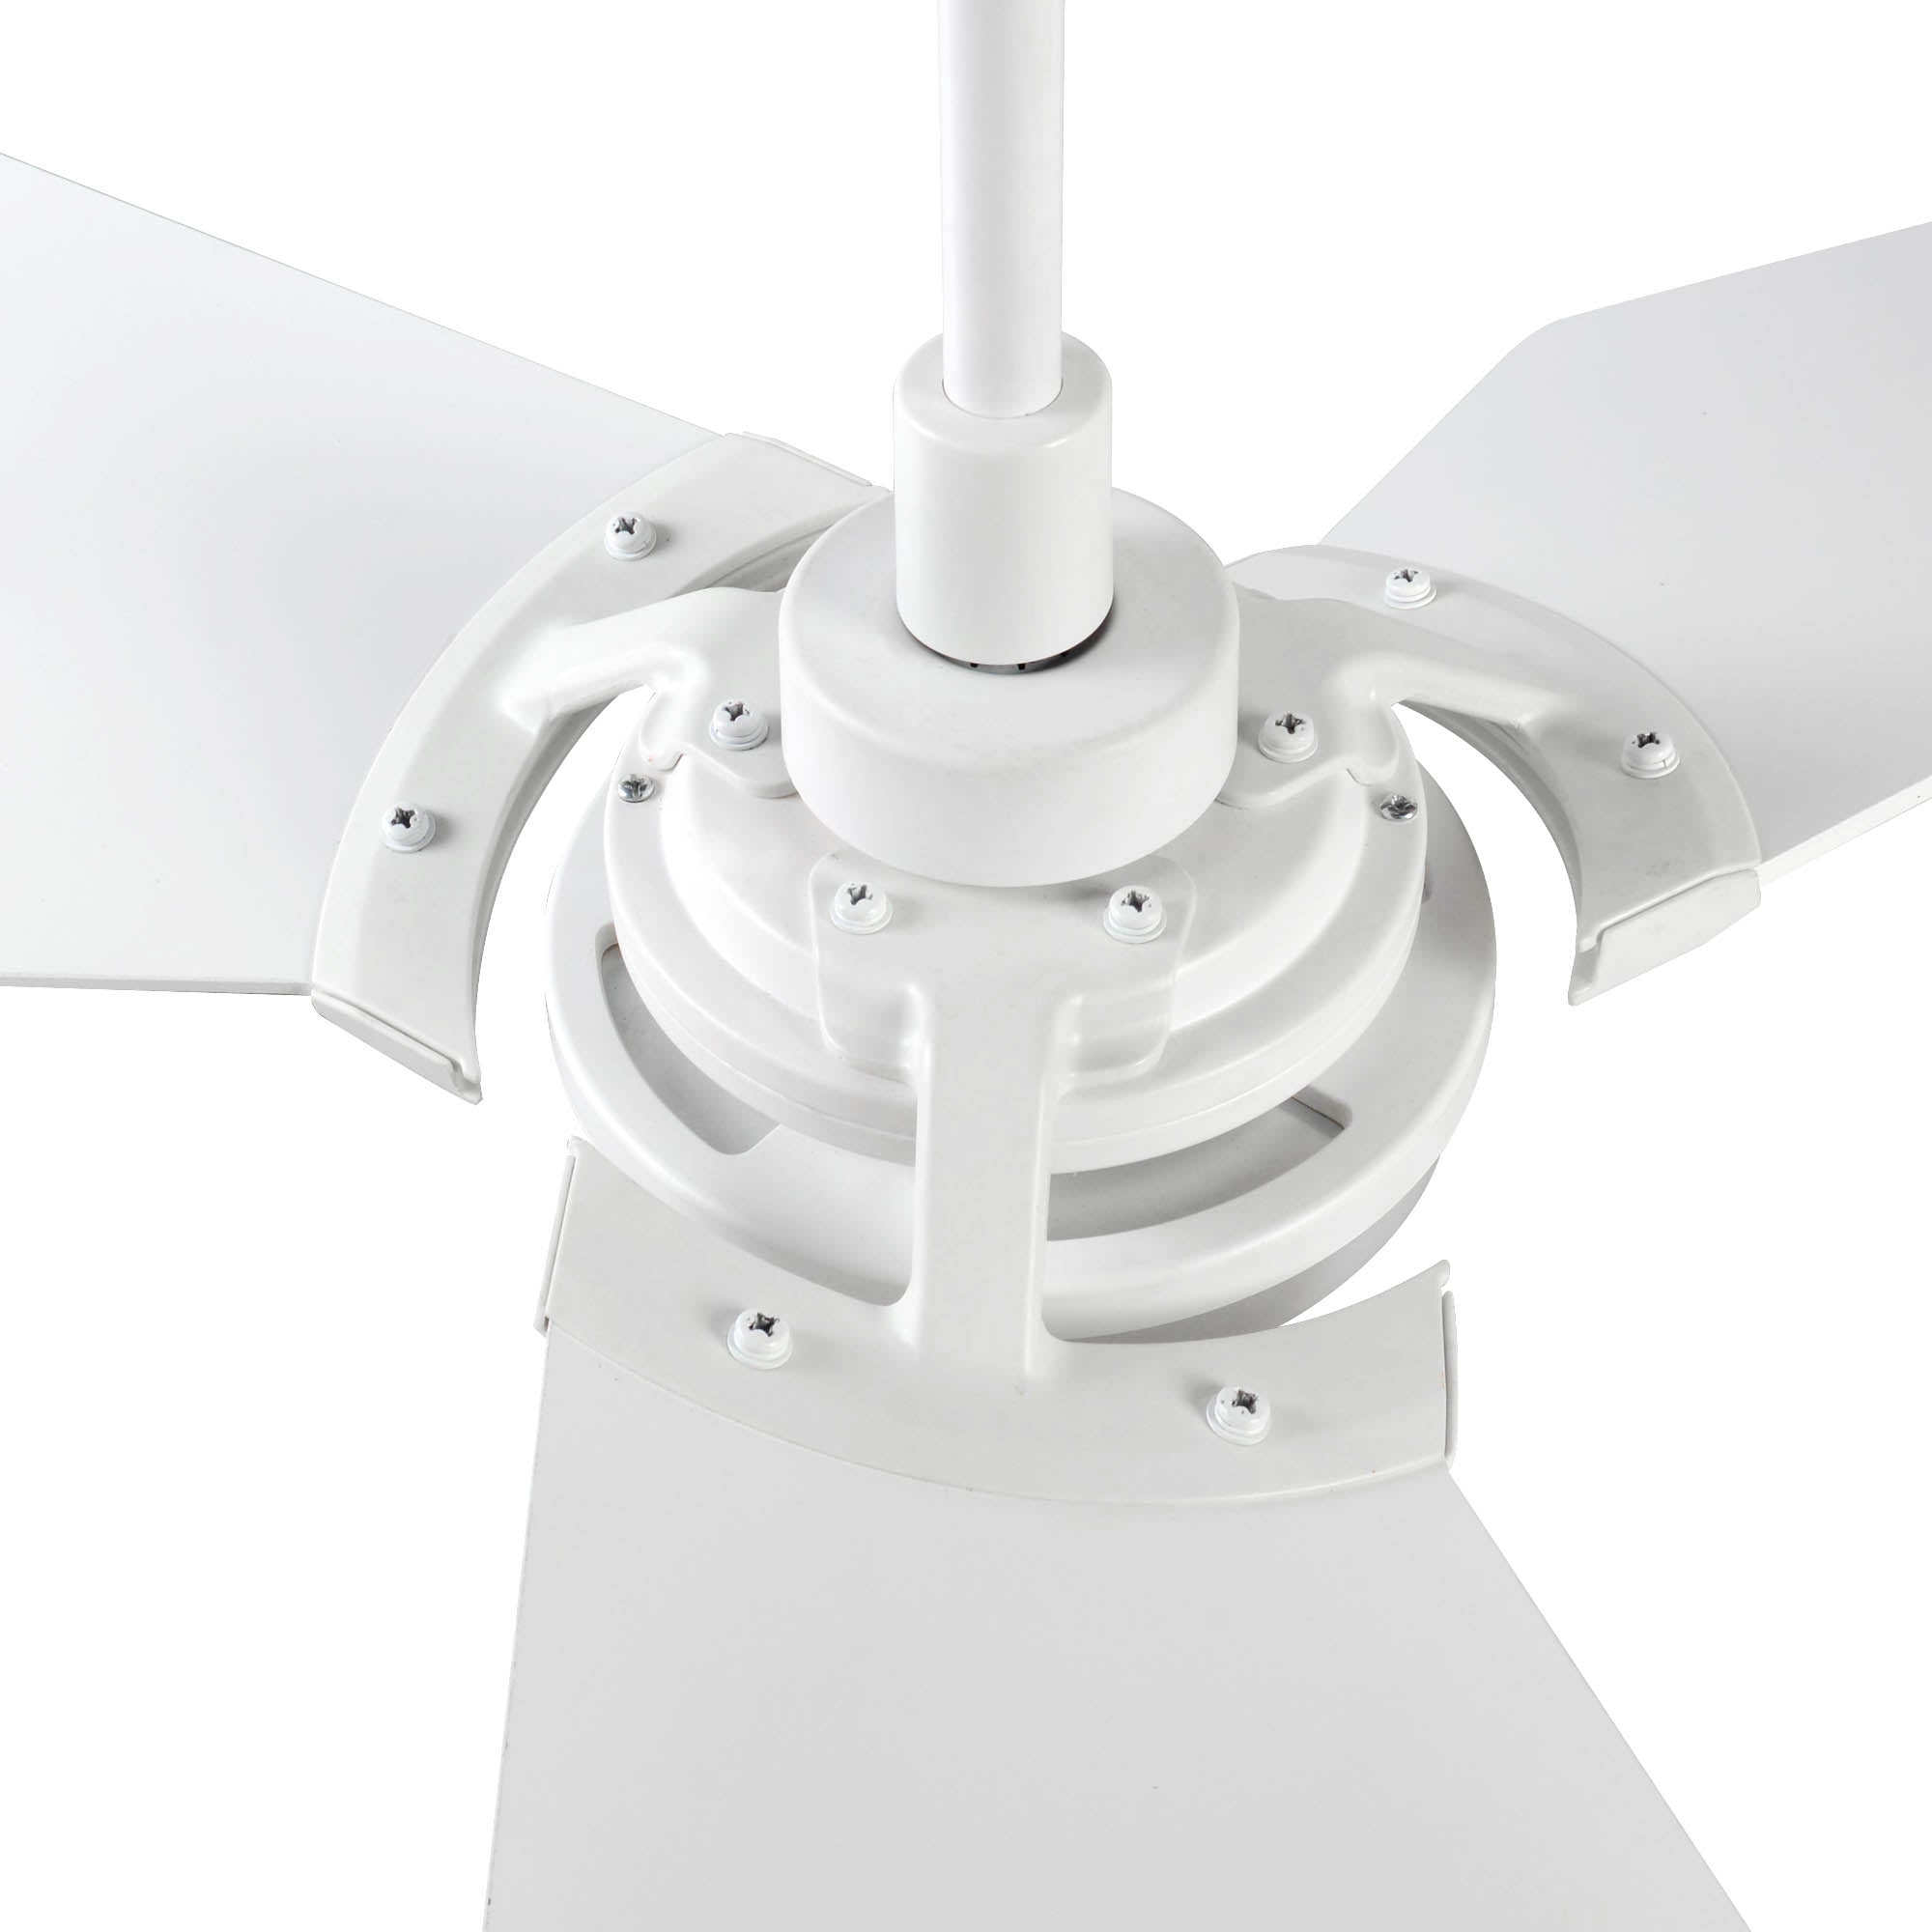 The Smafan Trailblazer 56&#39;&#39; Smart Fan’s sleek and stylish design fits perfectly with any décor trend. With a fully dimmable, and energy-efficient LED kit, whisper-quiet operation, compatible with Alexa, Google Assistant, Sir, carrohome app, easy install, Trailblazer helps you have a smarter way to stay cool.